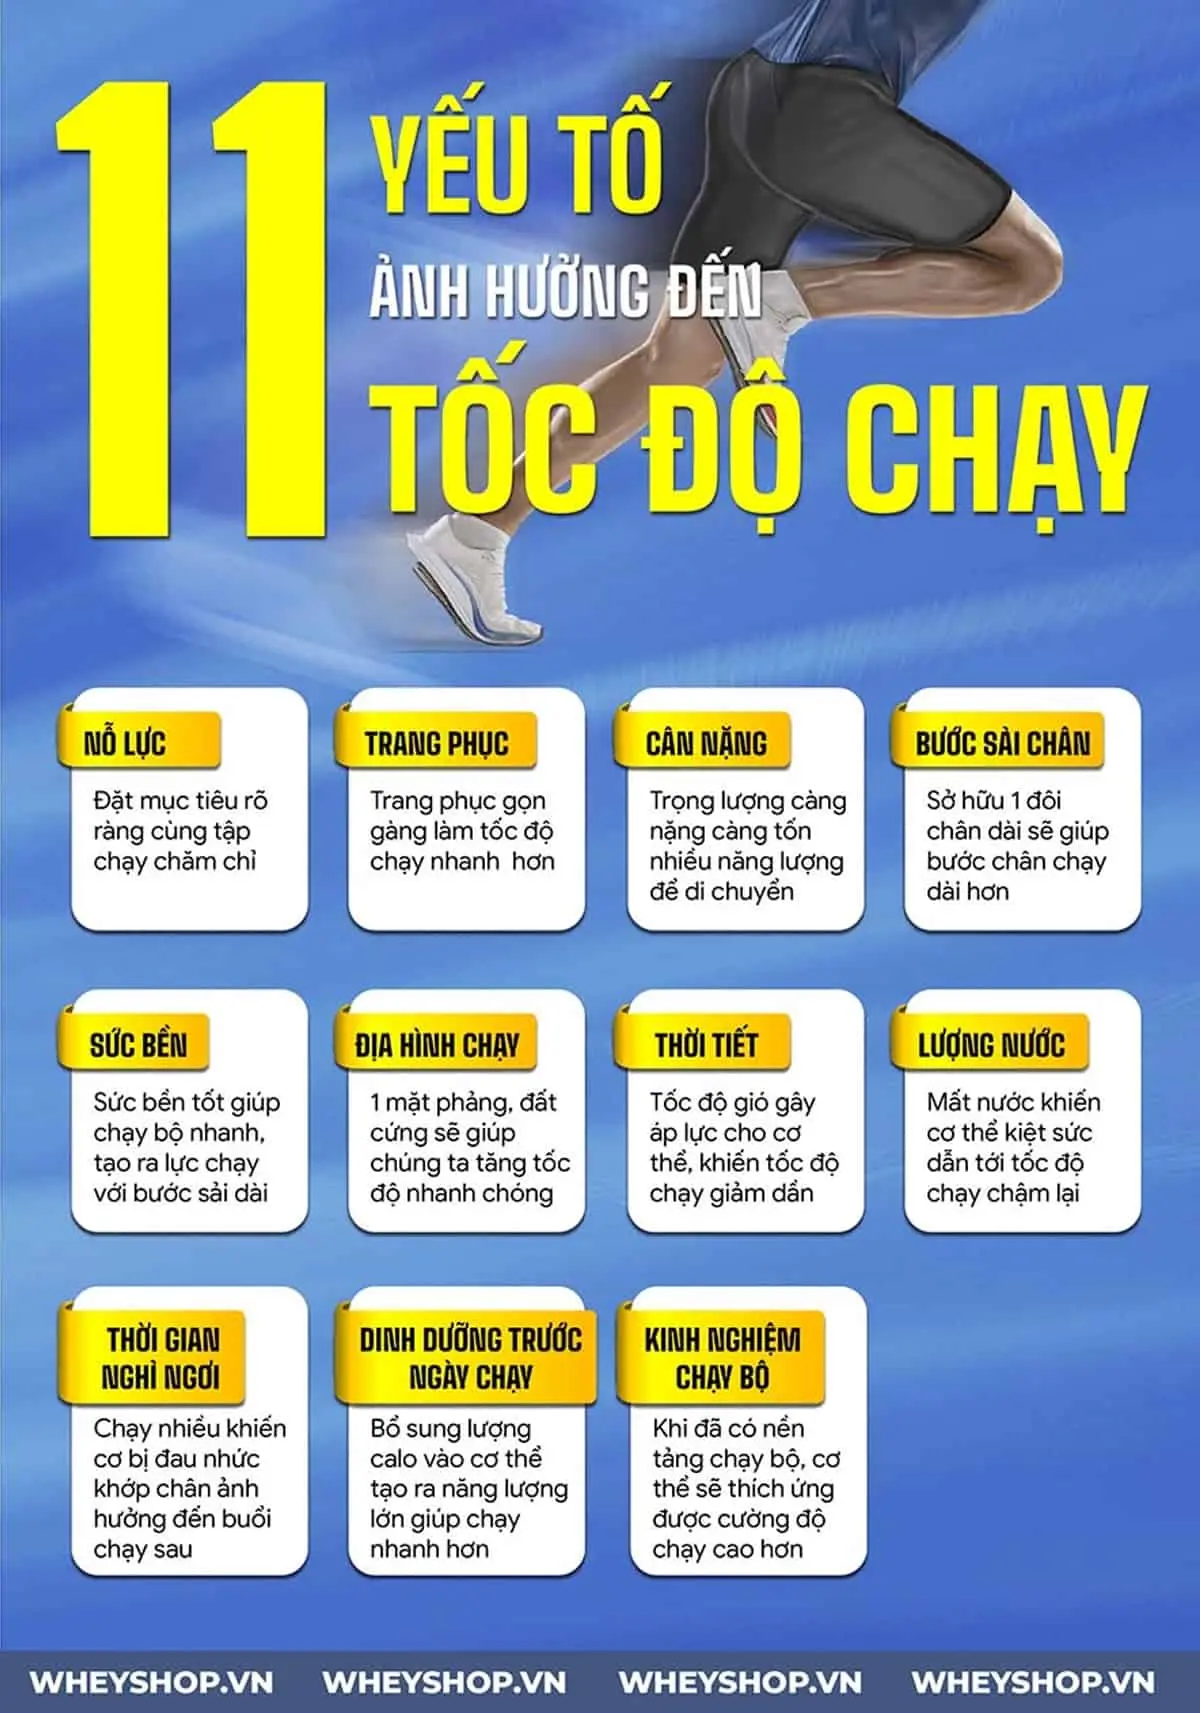 toc-do-chay-nhanh-nhat-cua-con-nguoi-3